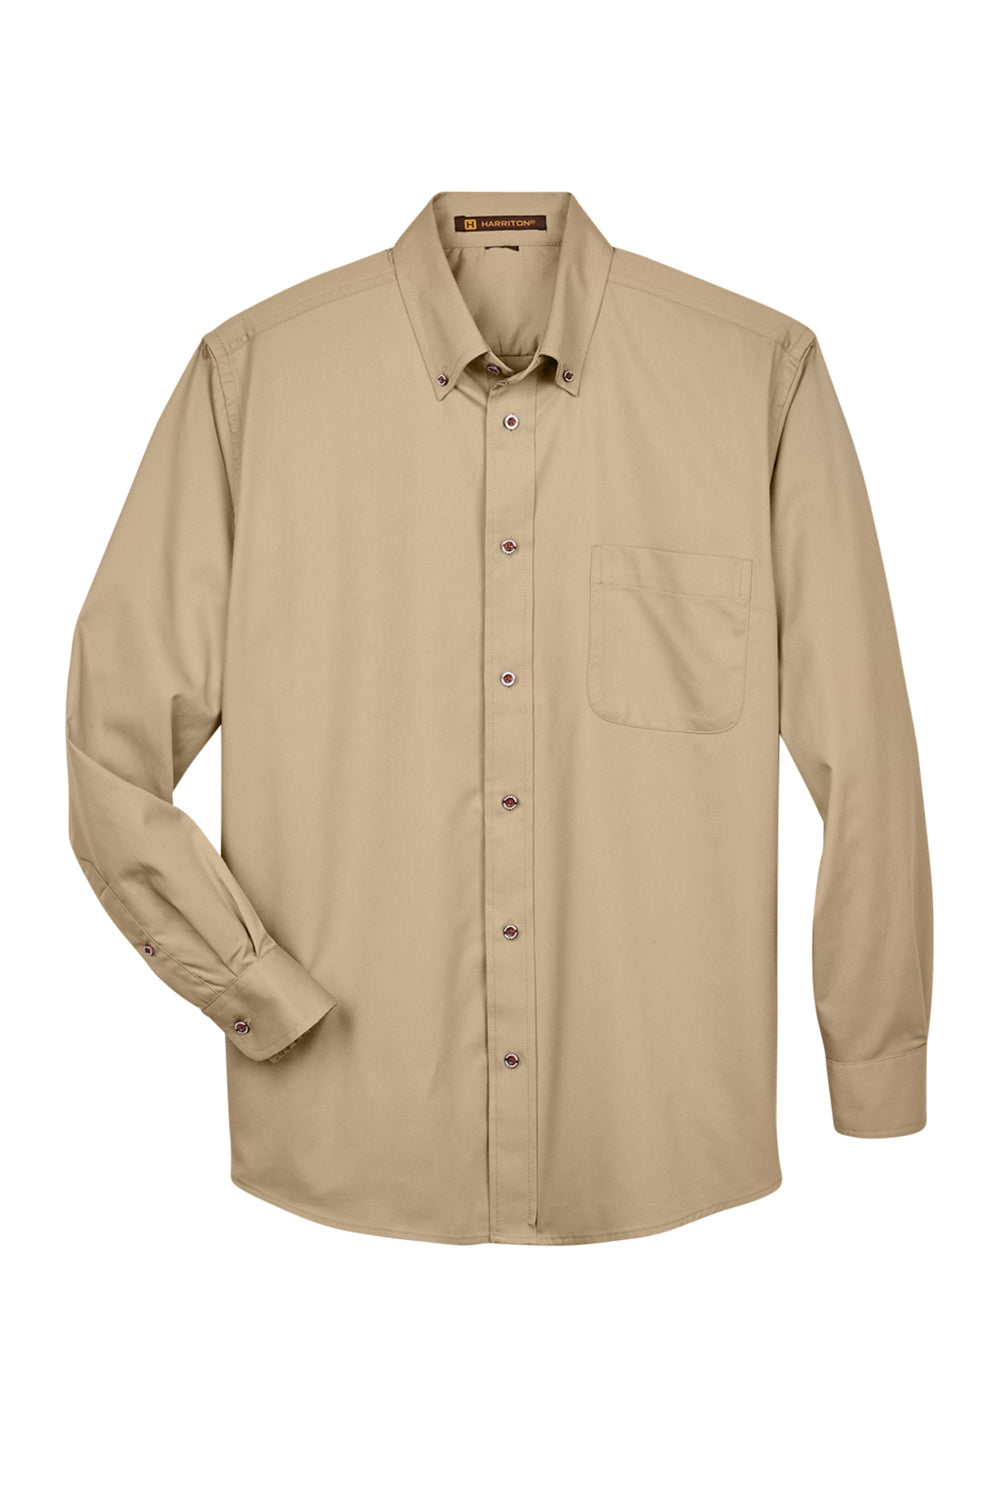 Harriton M500/M500T Wrinkle Resistant Long Sleeve Button Down Shirt w/ Pocket Stone Flat Front